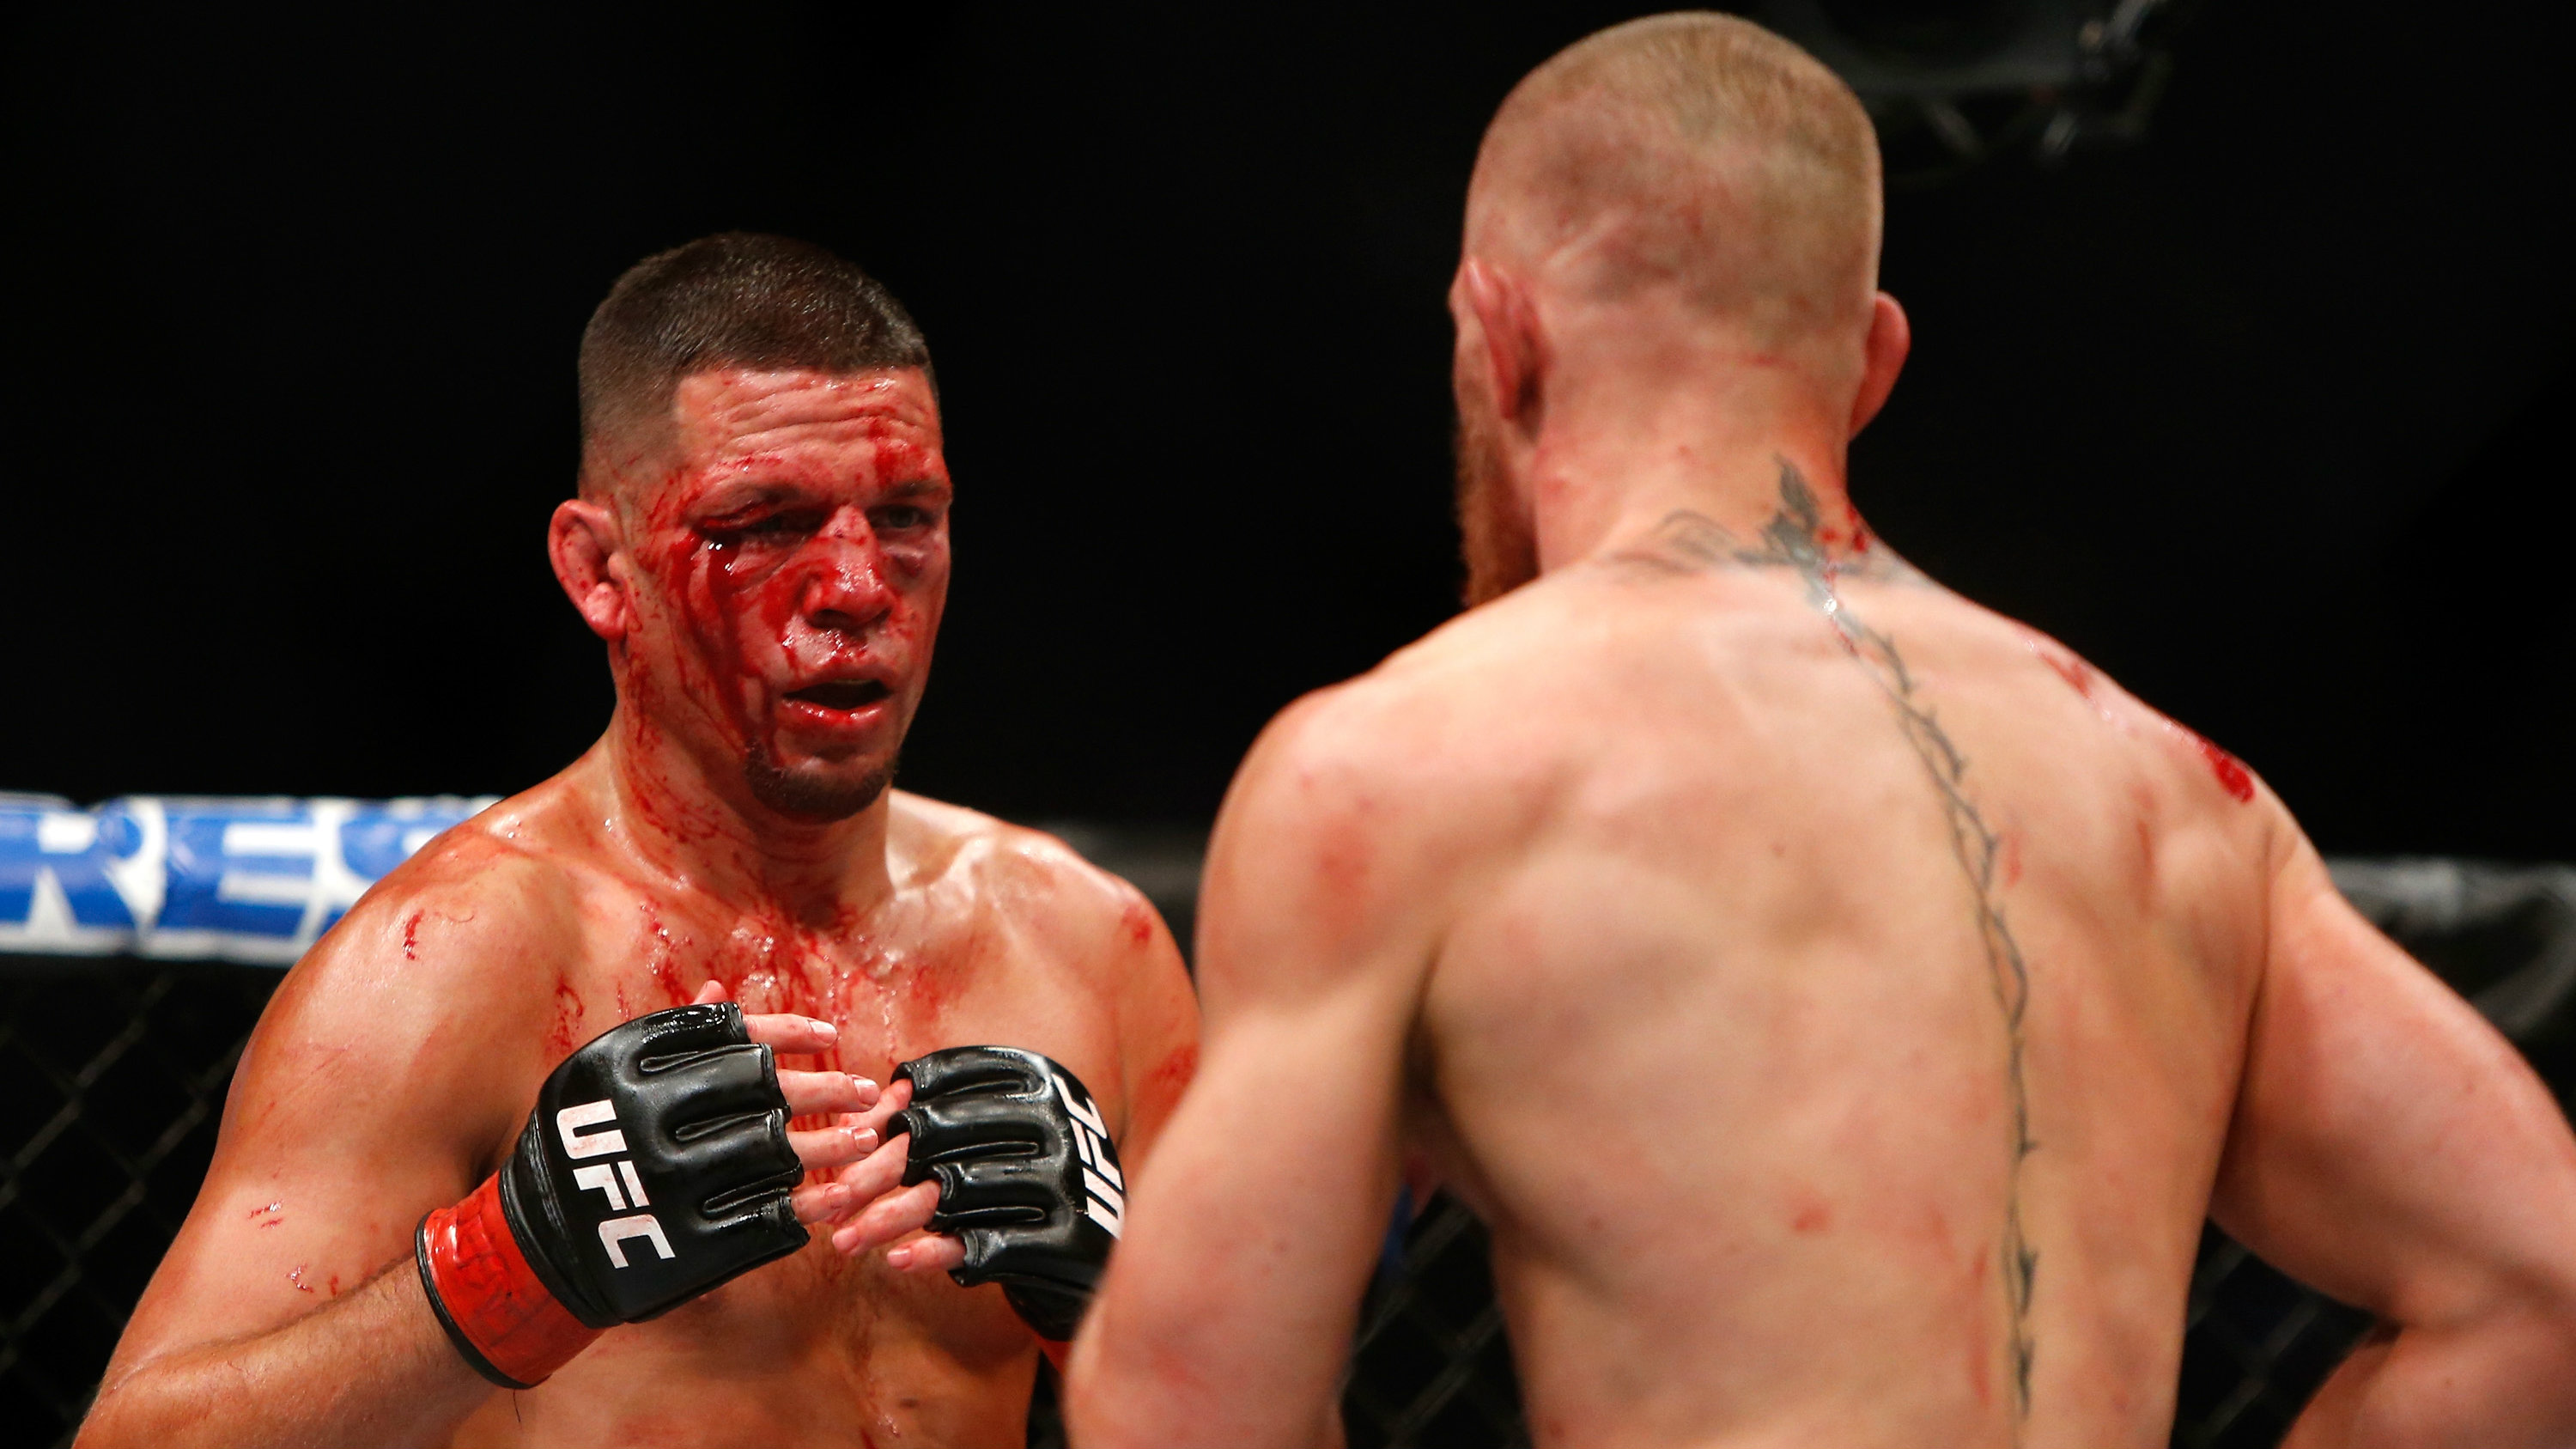 Nate Diaz's incredible mid-fight sledge | Sporting News3000 x 1687